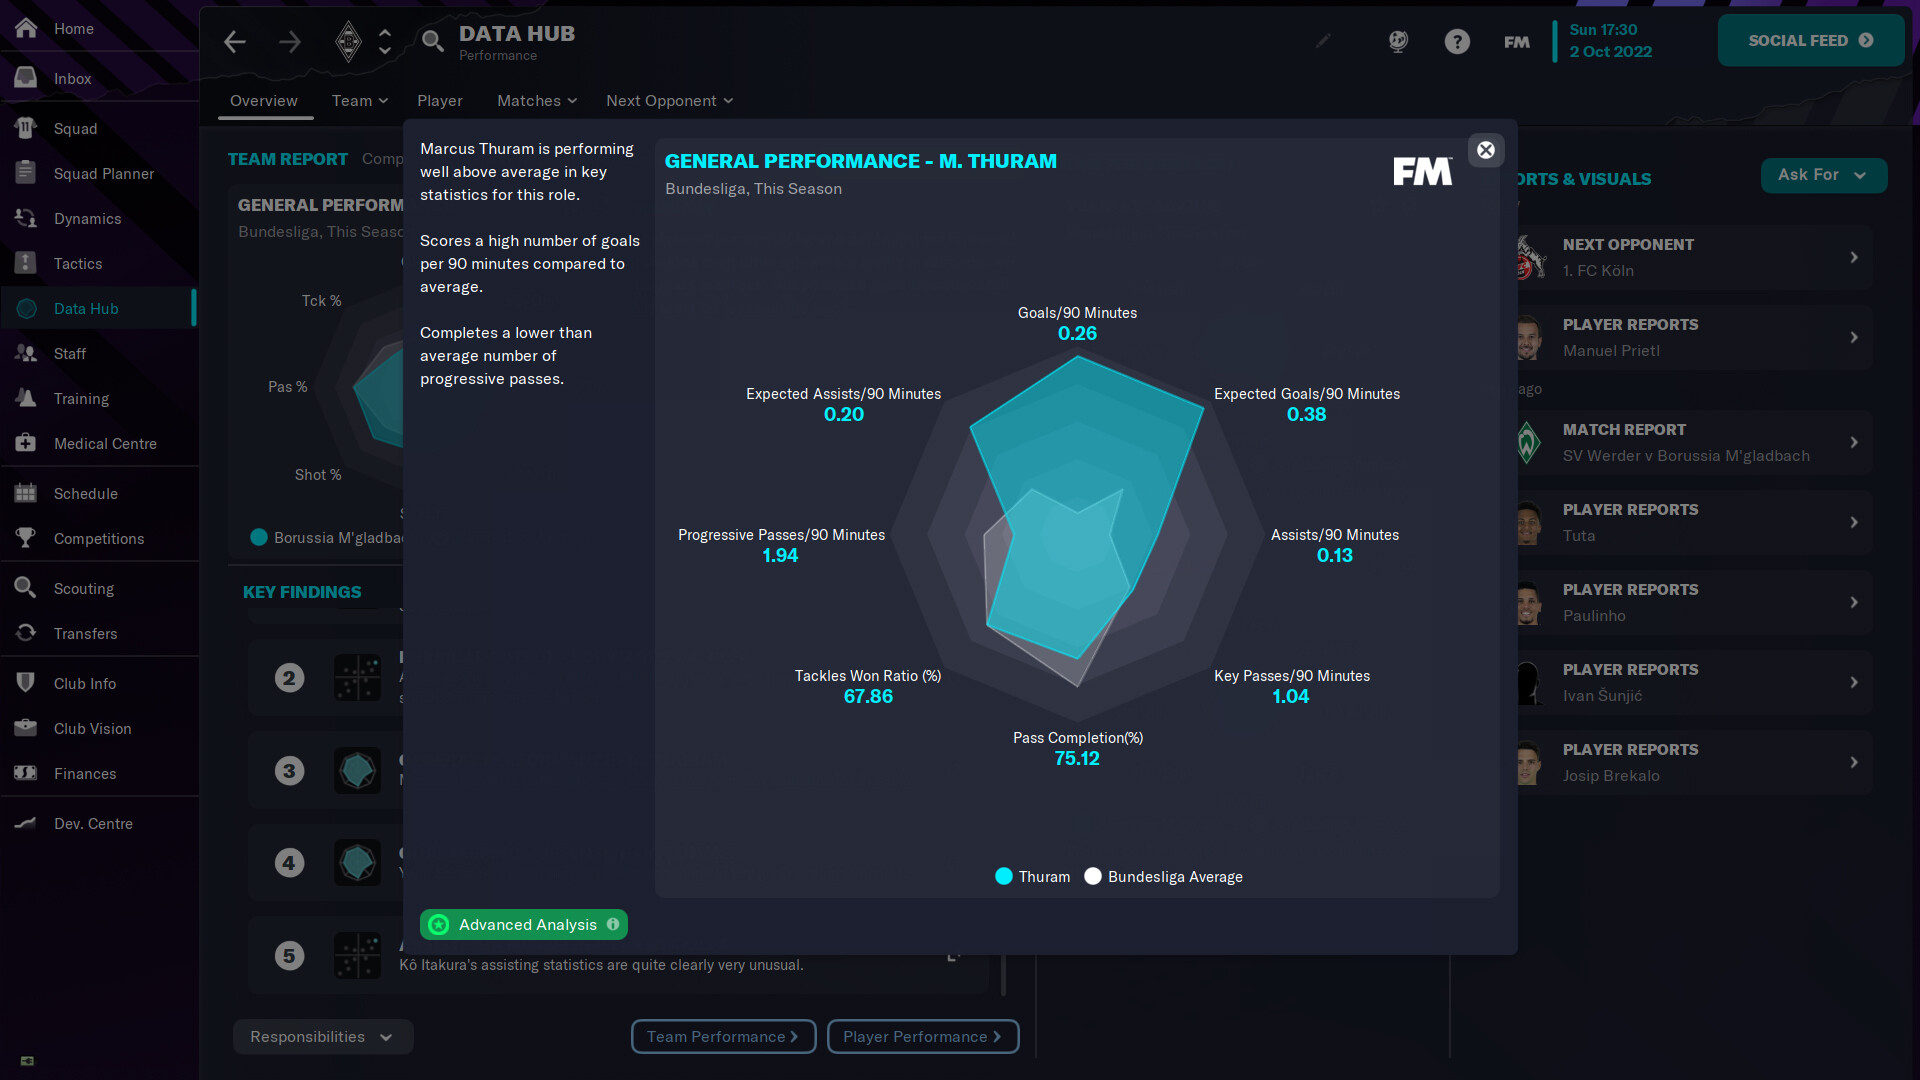 Football Manager 2023 Free Download